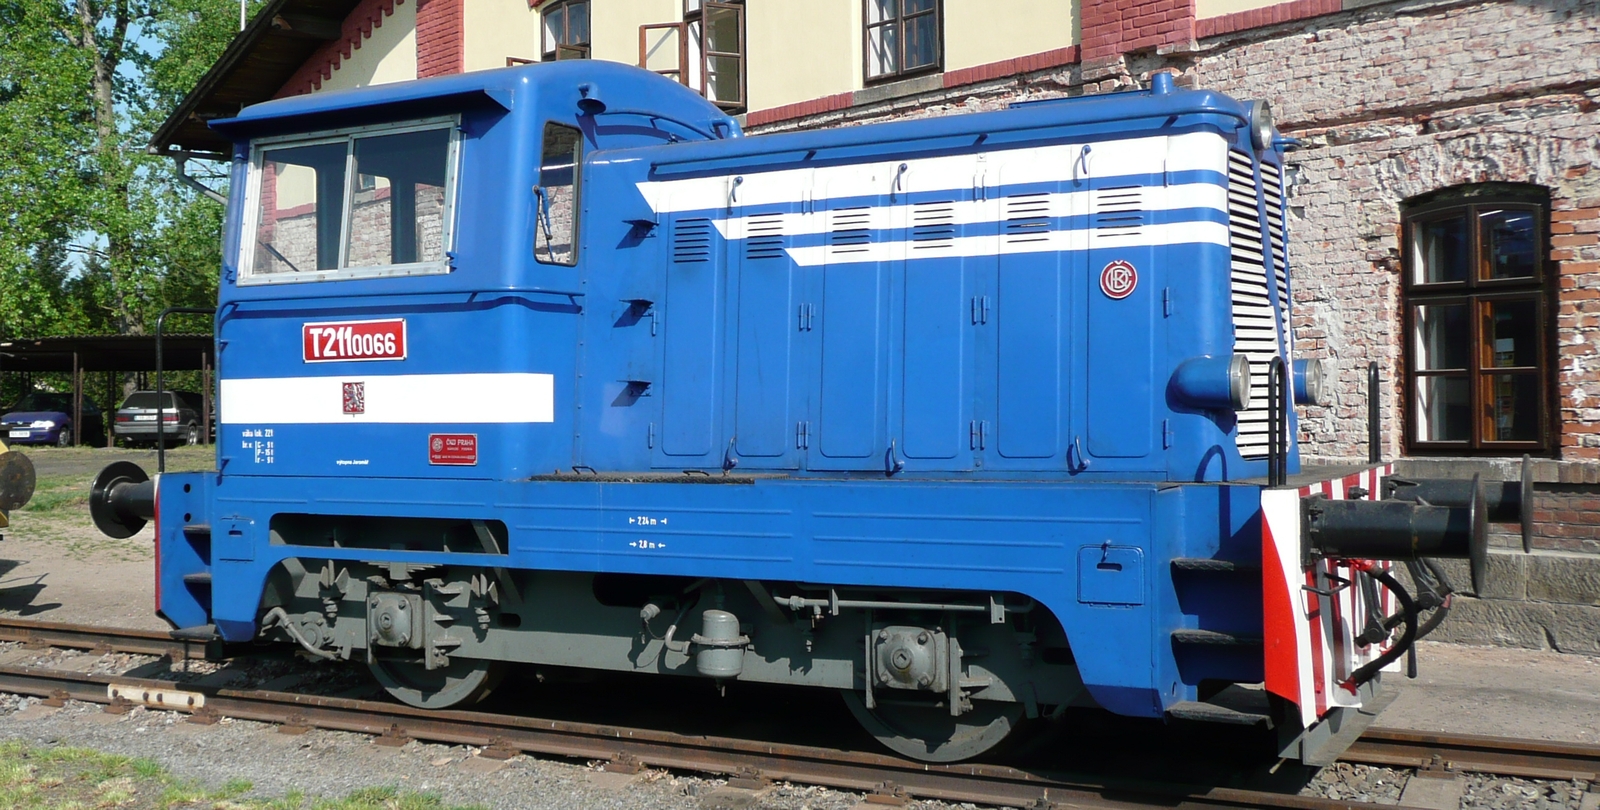 The CSD T 211 was a typical light diesel-mechanical shunting locomotive with an initial output of 165 hp